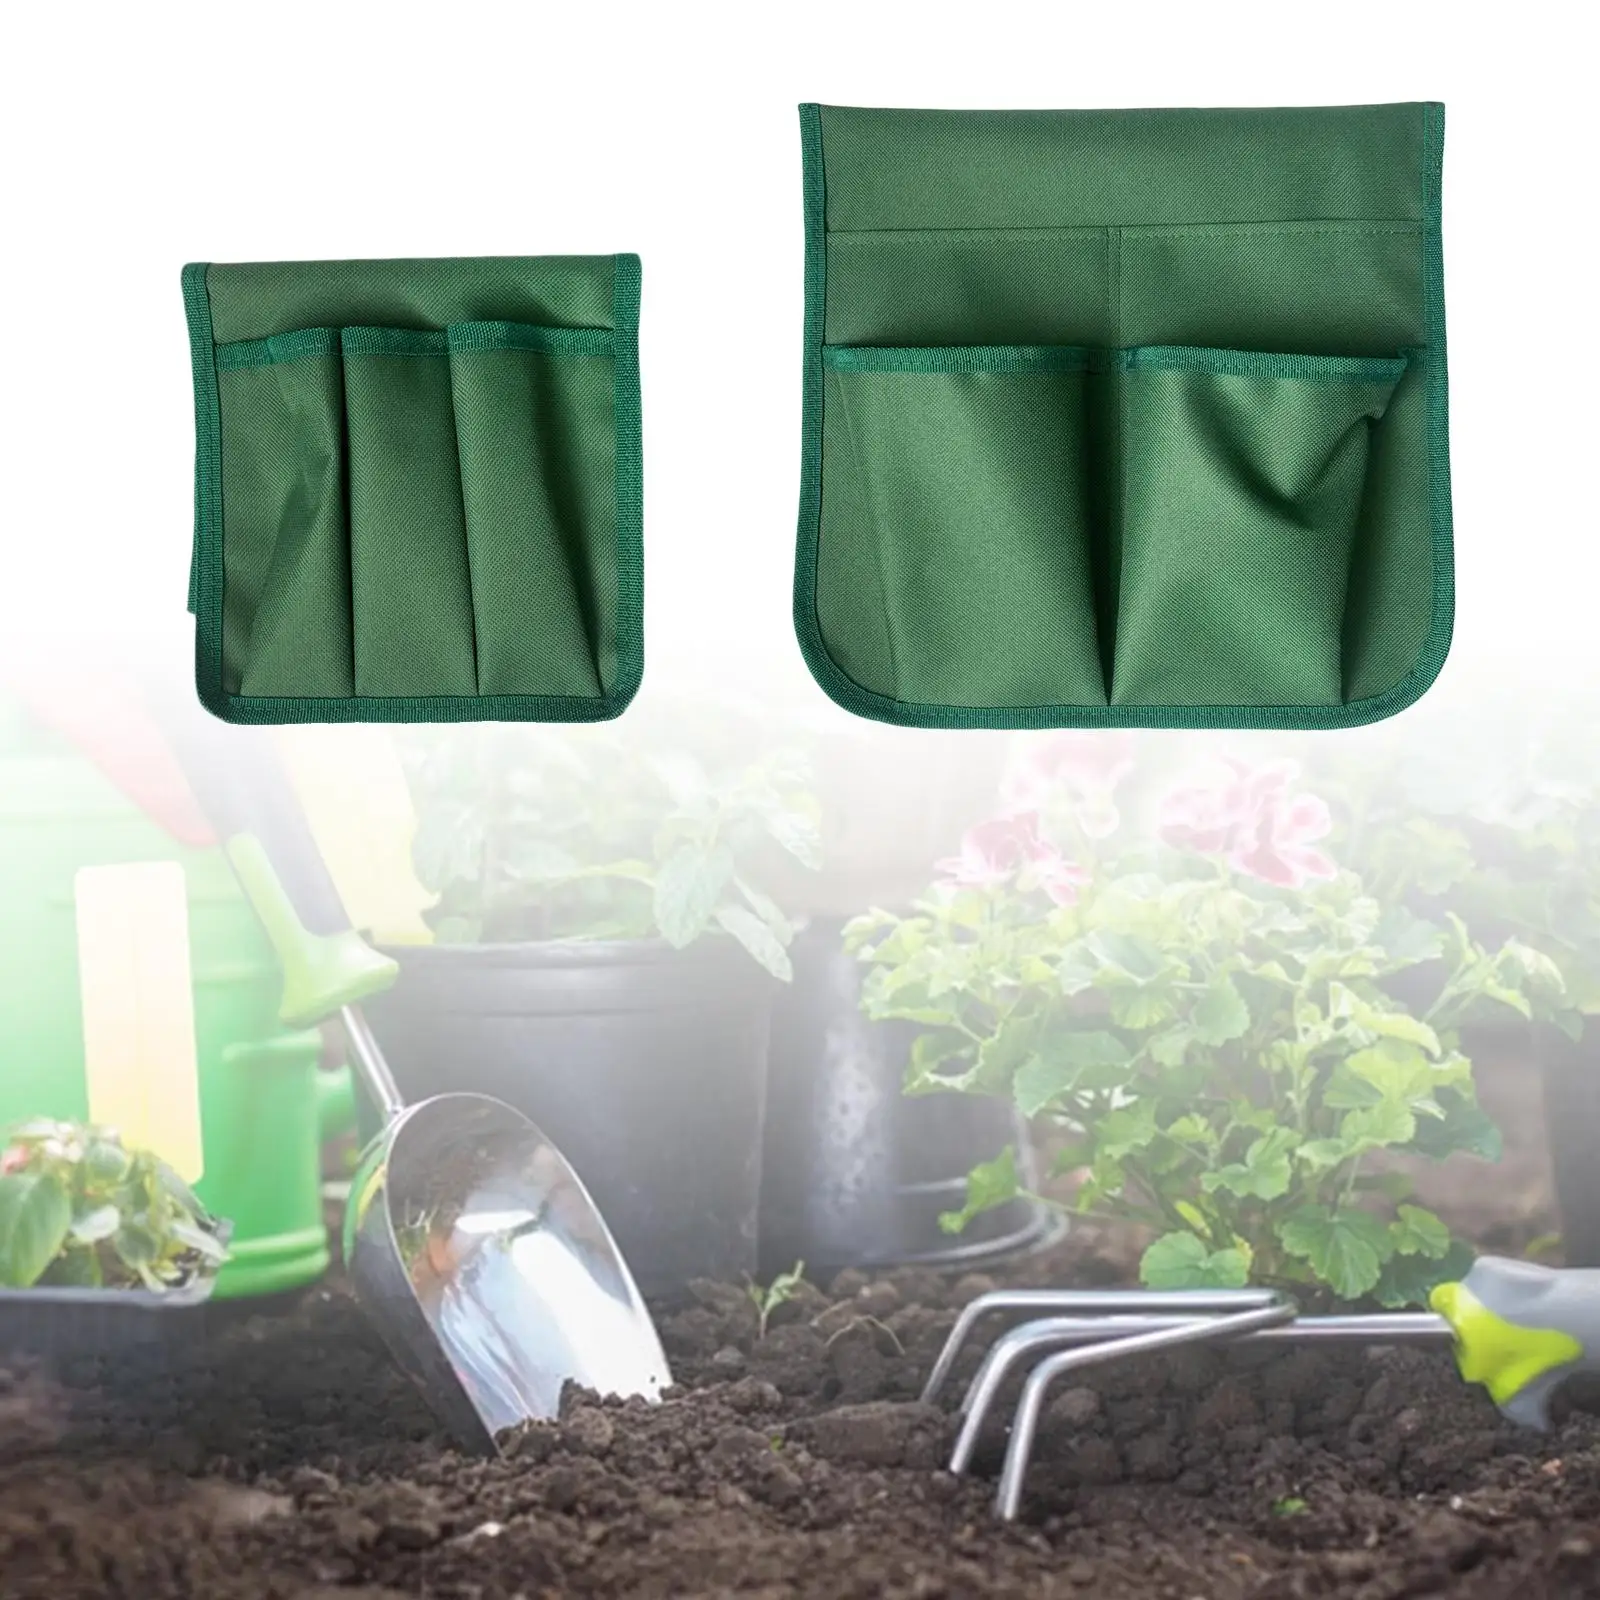 Gardening Hand Tool Pouch Utility Pockets Apron Bench Kneeling Bag Multi Pockets Lightweight Foldable Tool Storage Bag Pouch